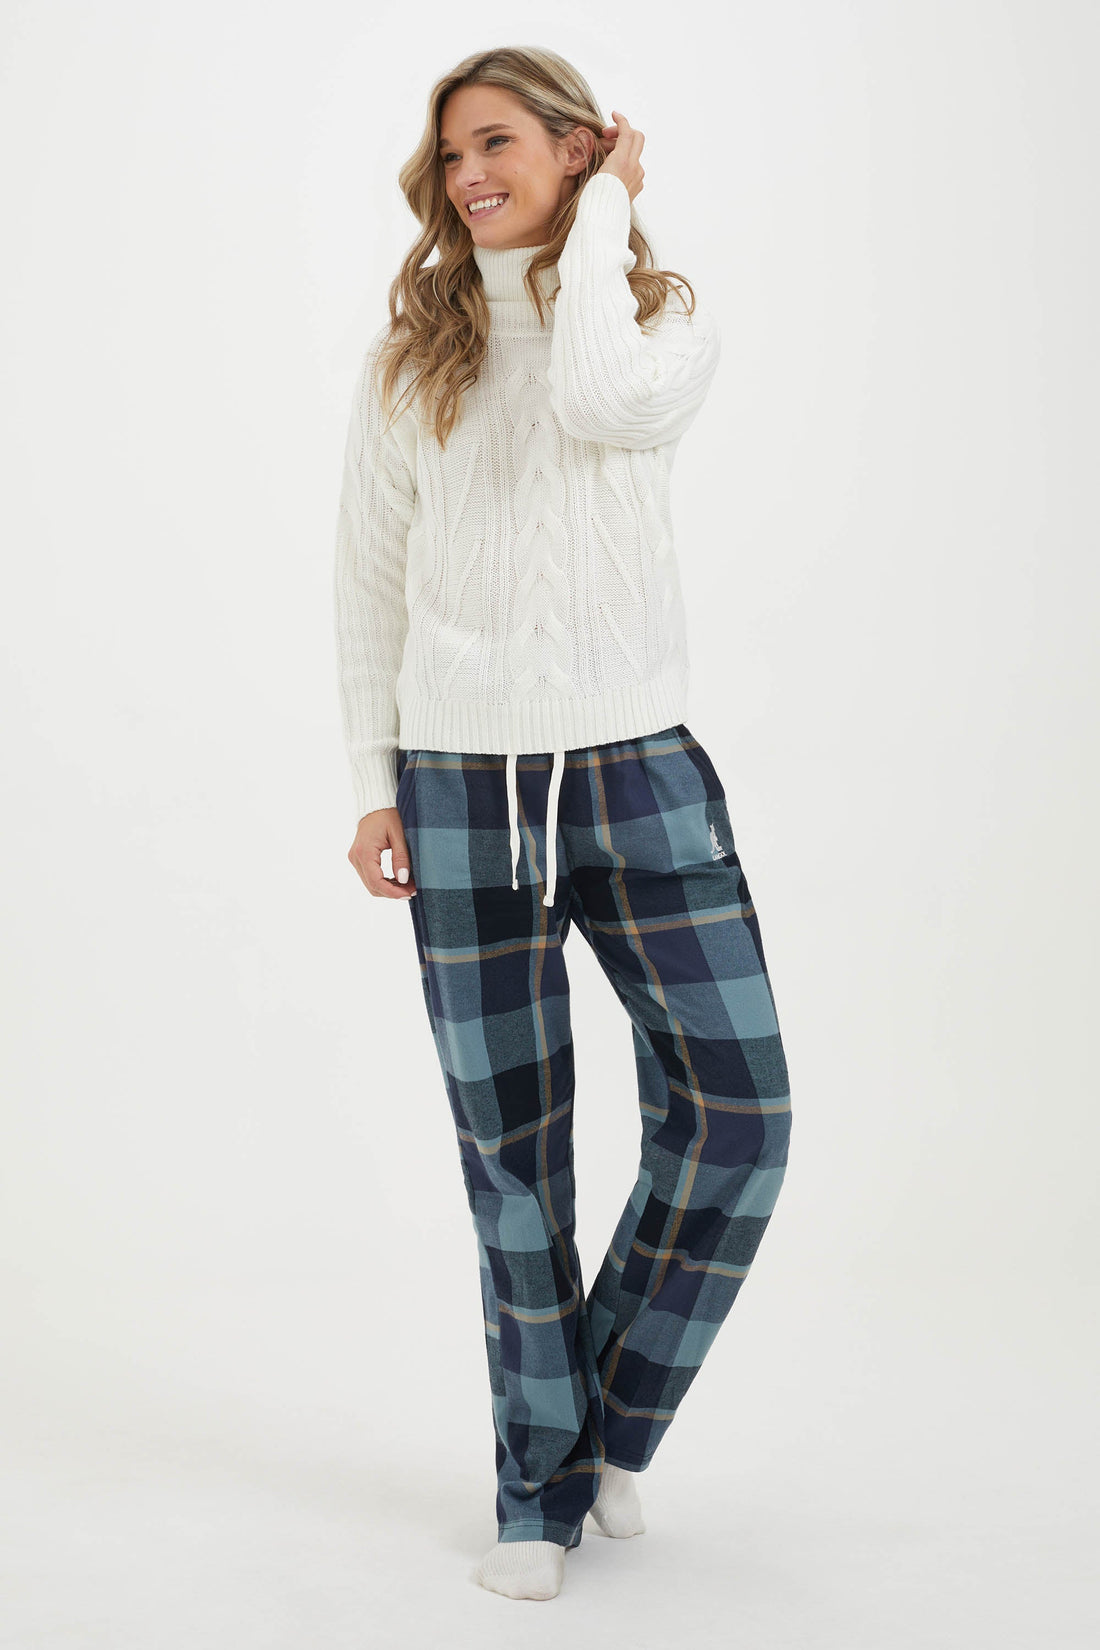 Printed flannel relaxation pants